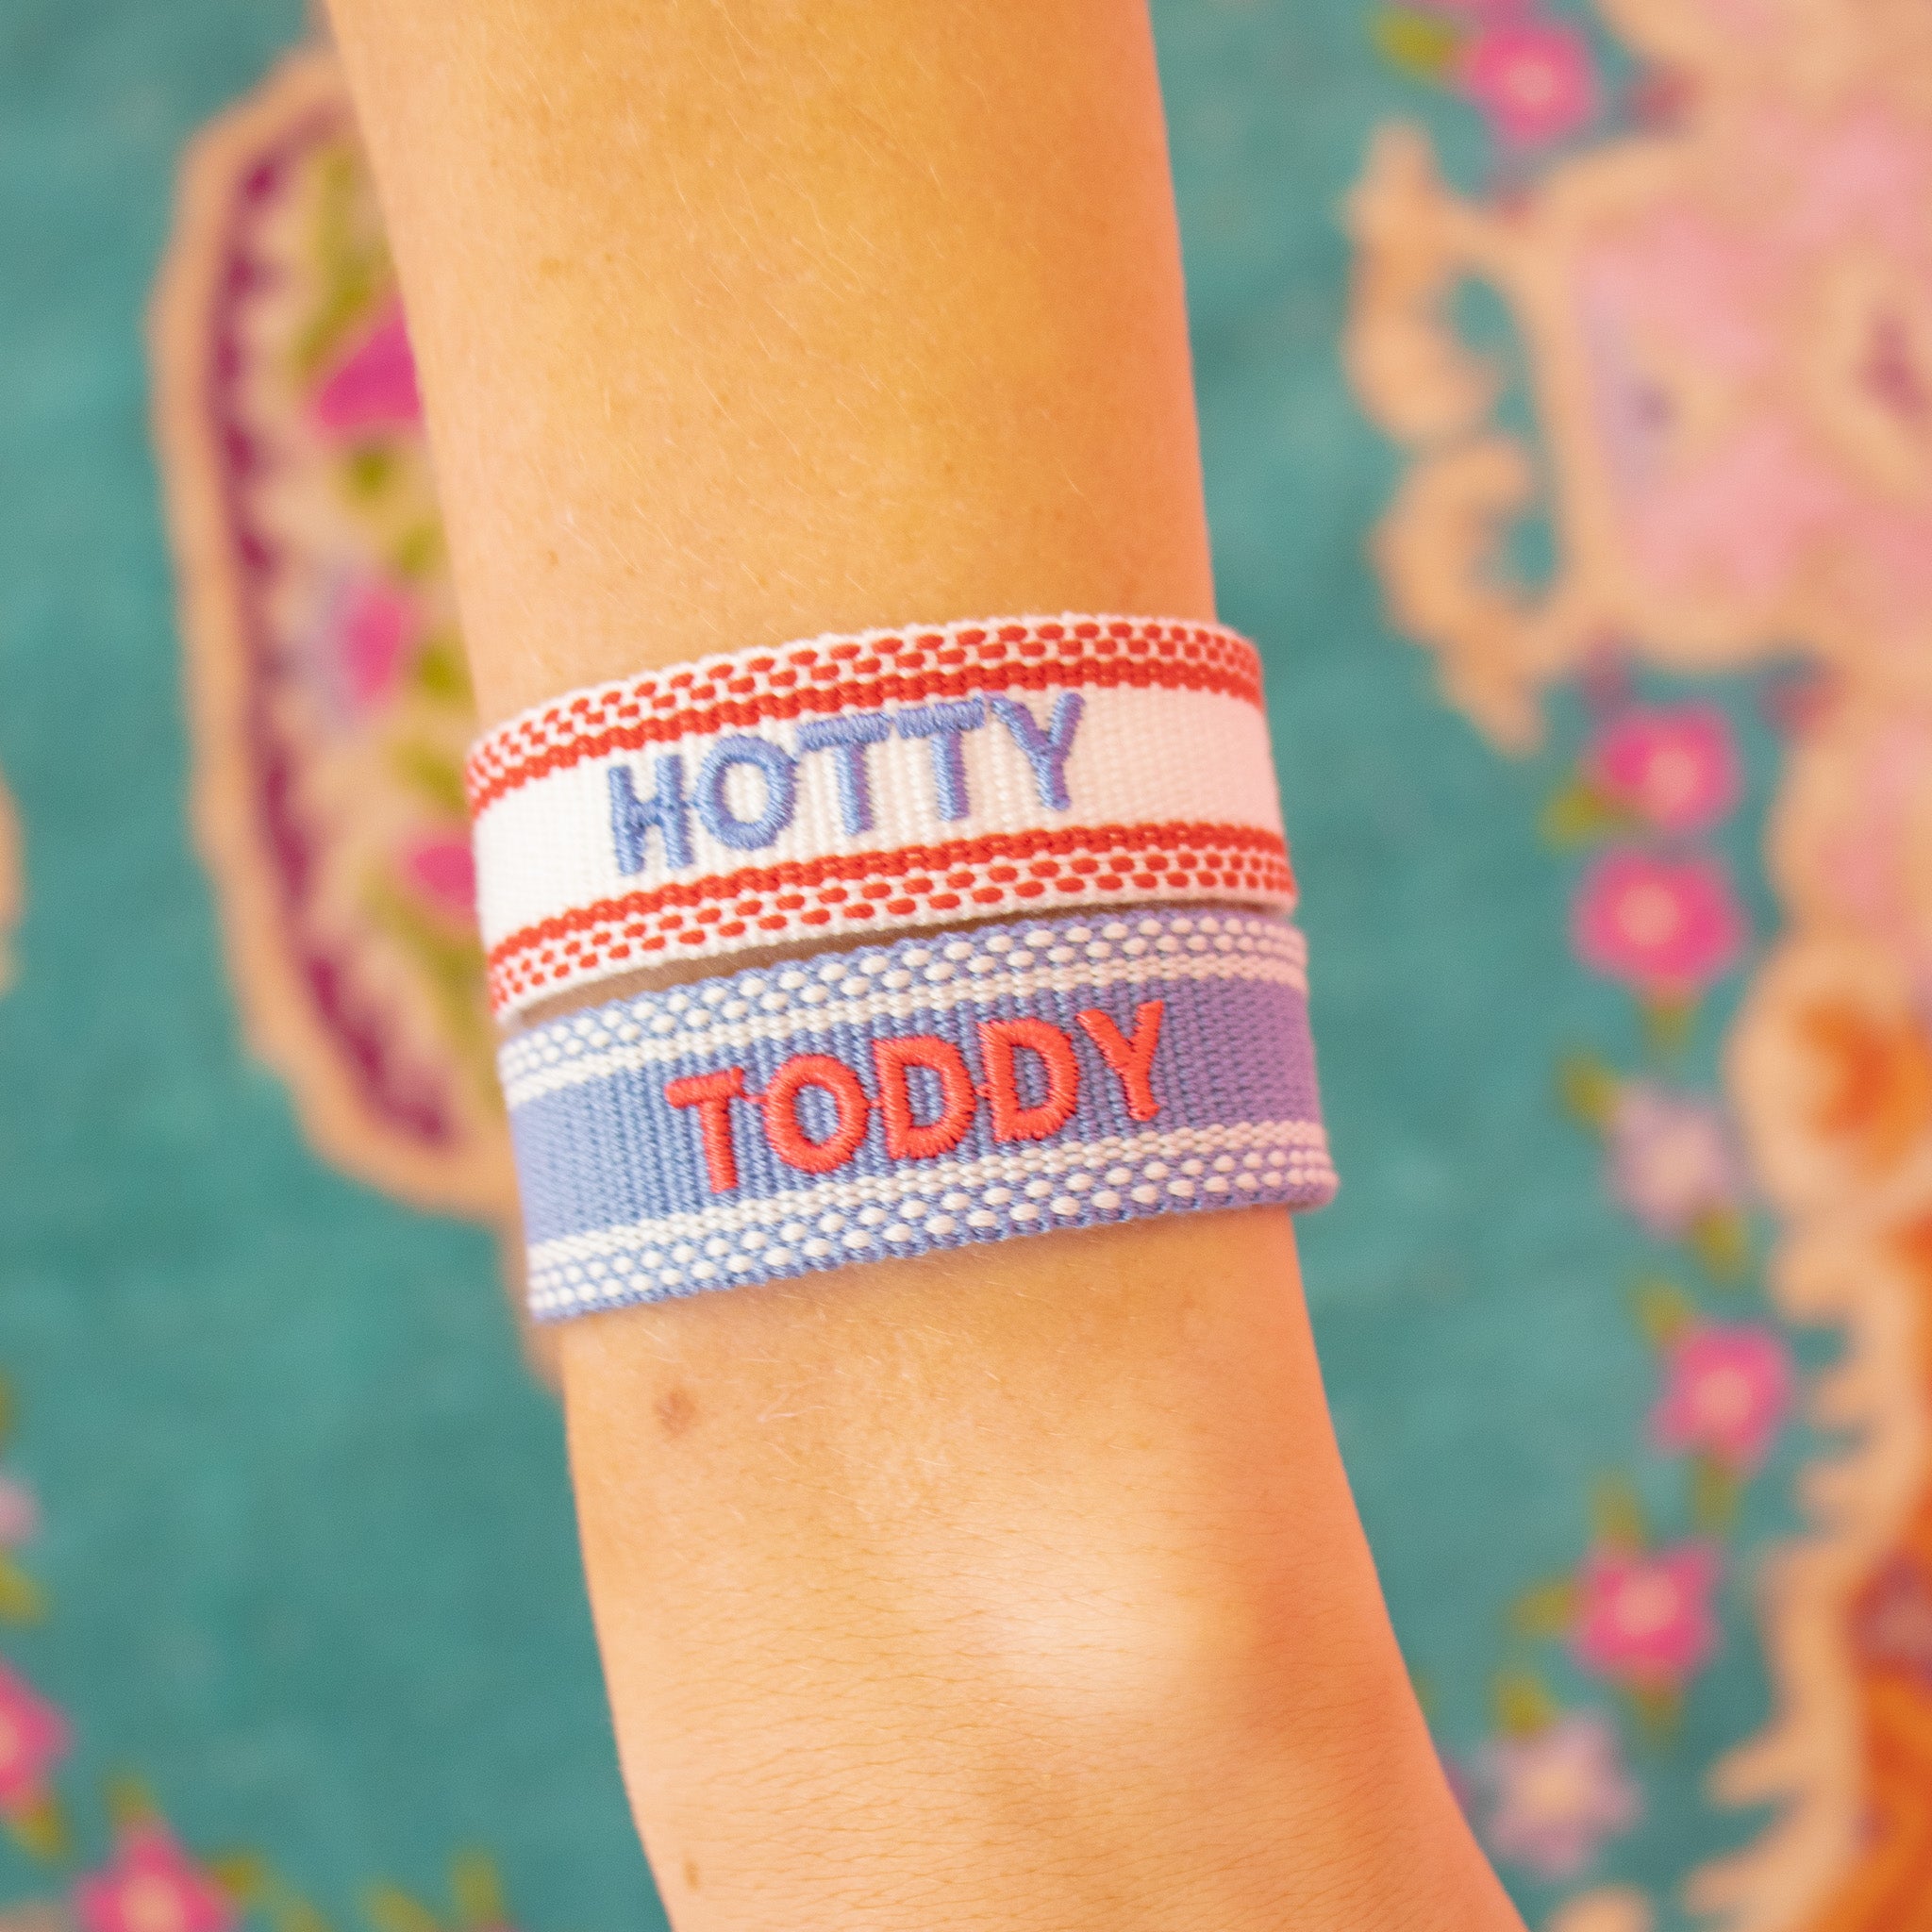 Hotty or Toddy Bracelet